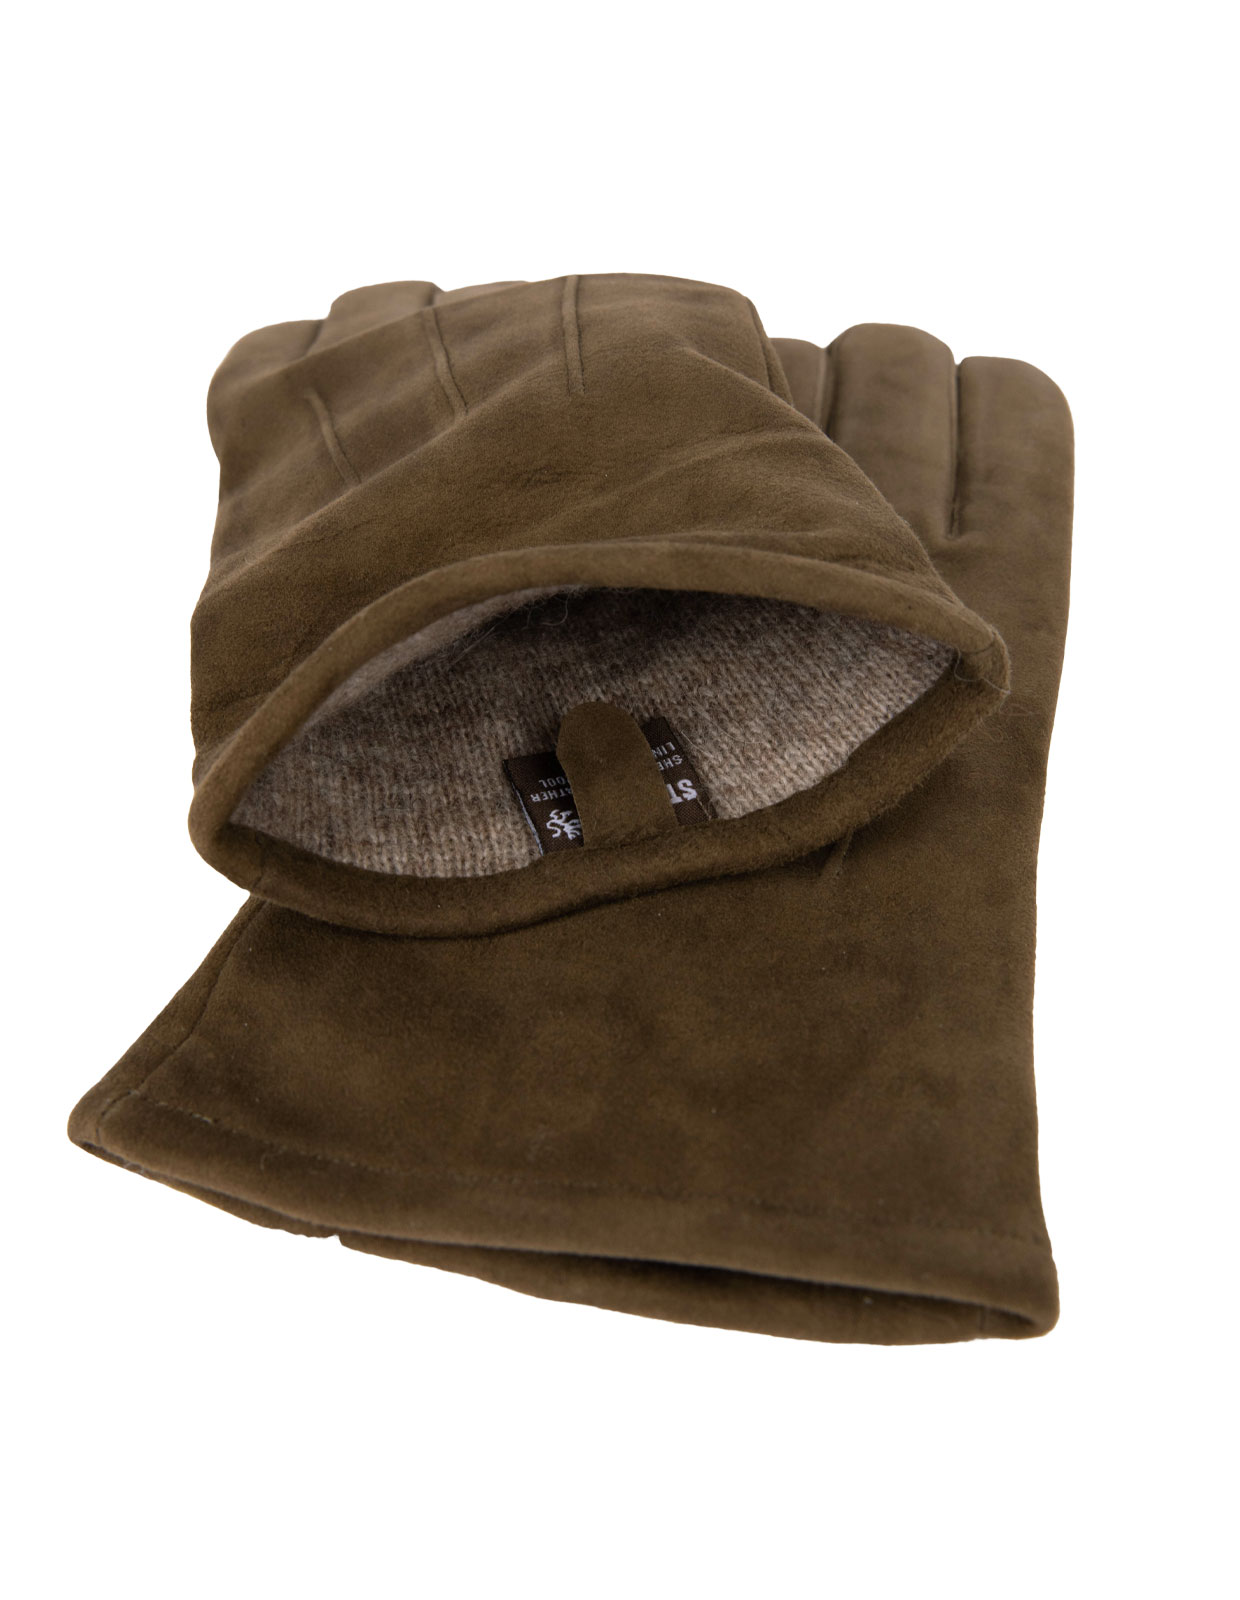 Classic Suede Gloves Olive Green Stl 10